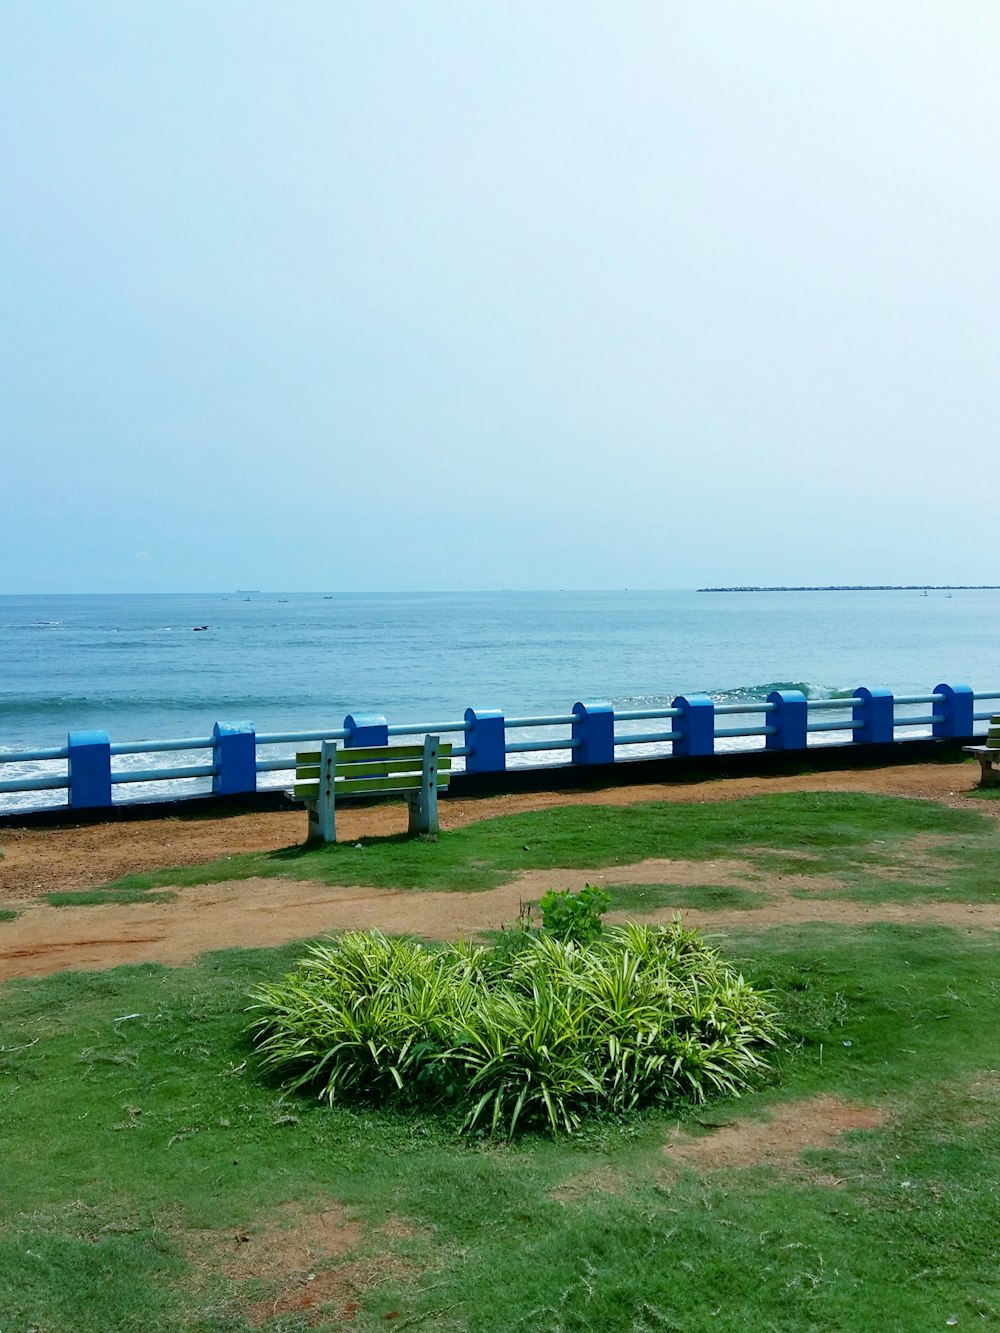 a row of blue benches next to a body of water